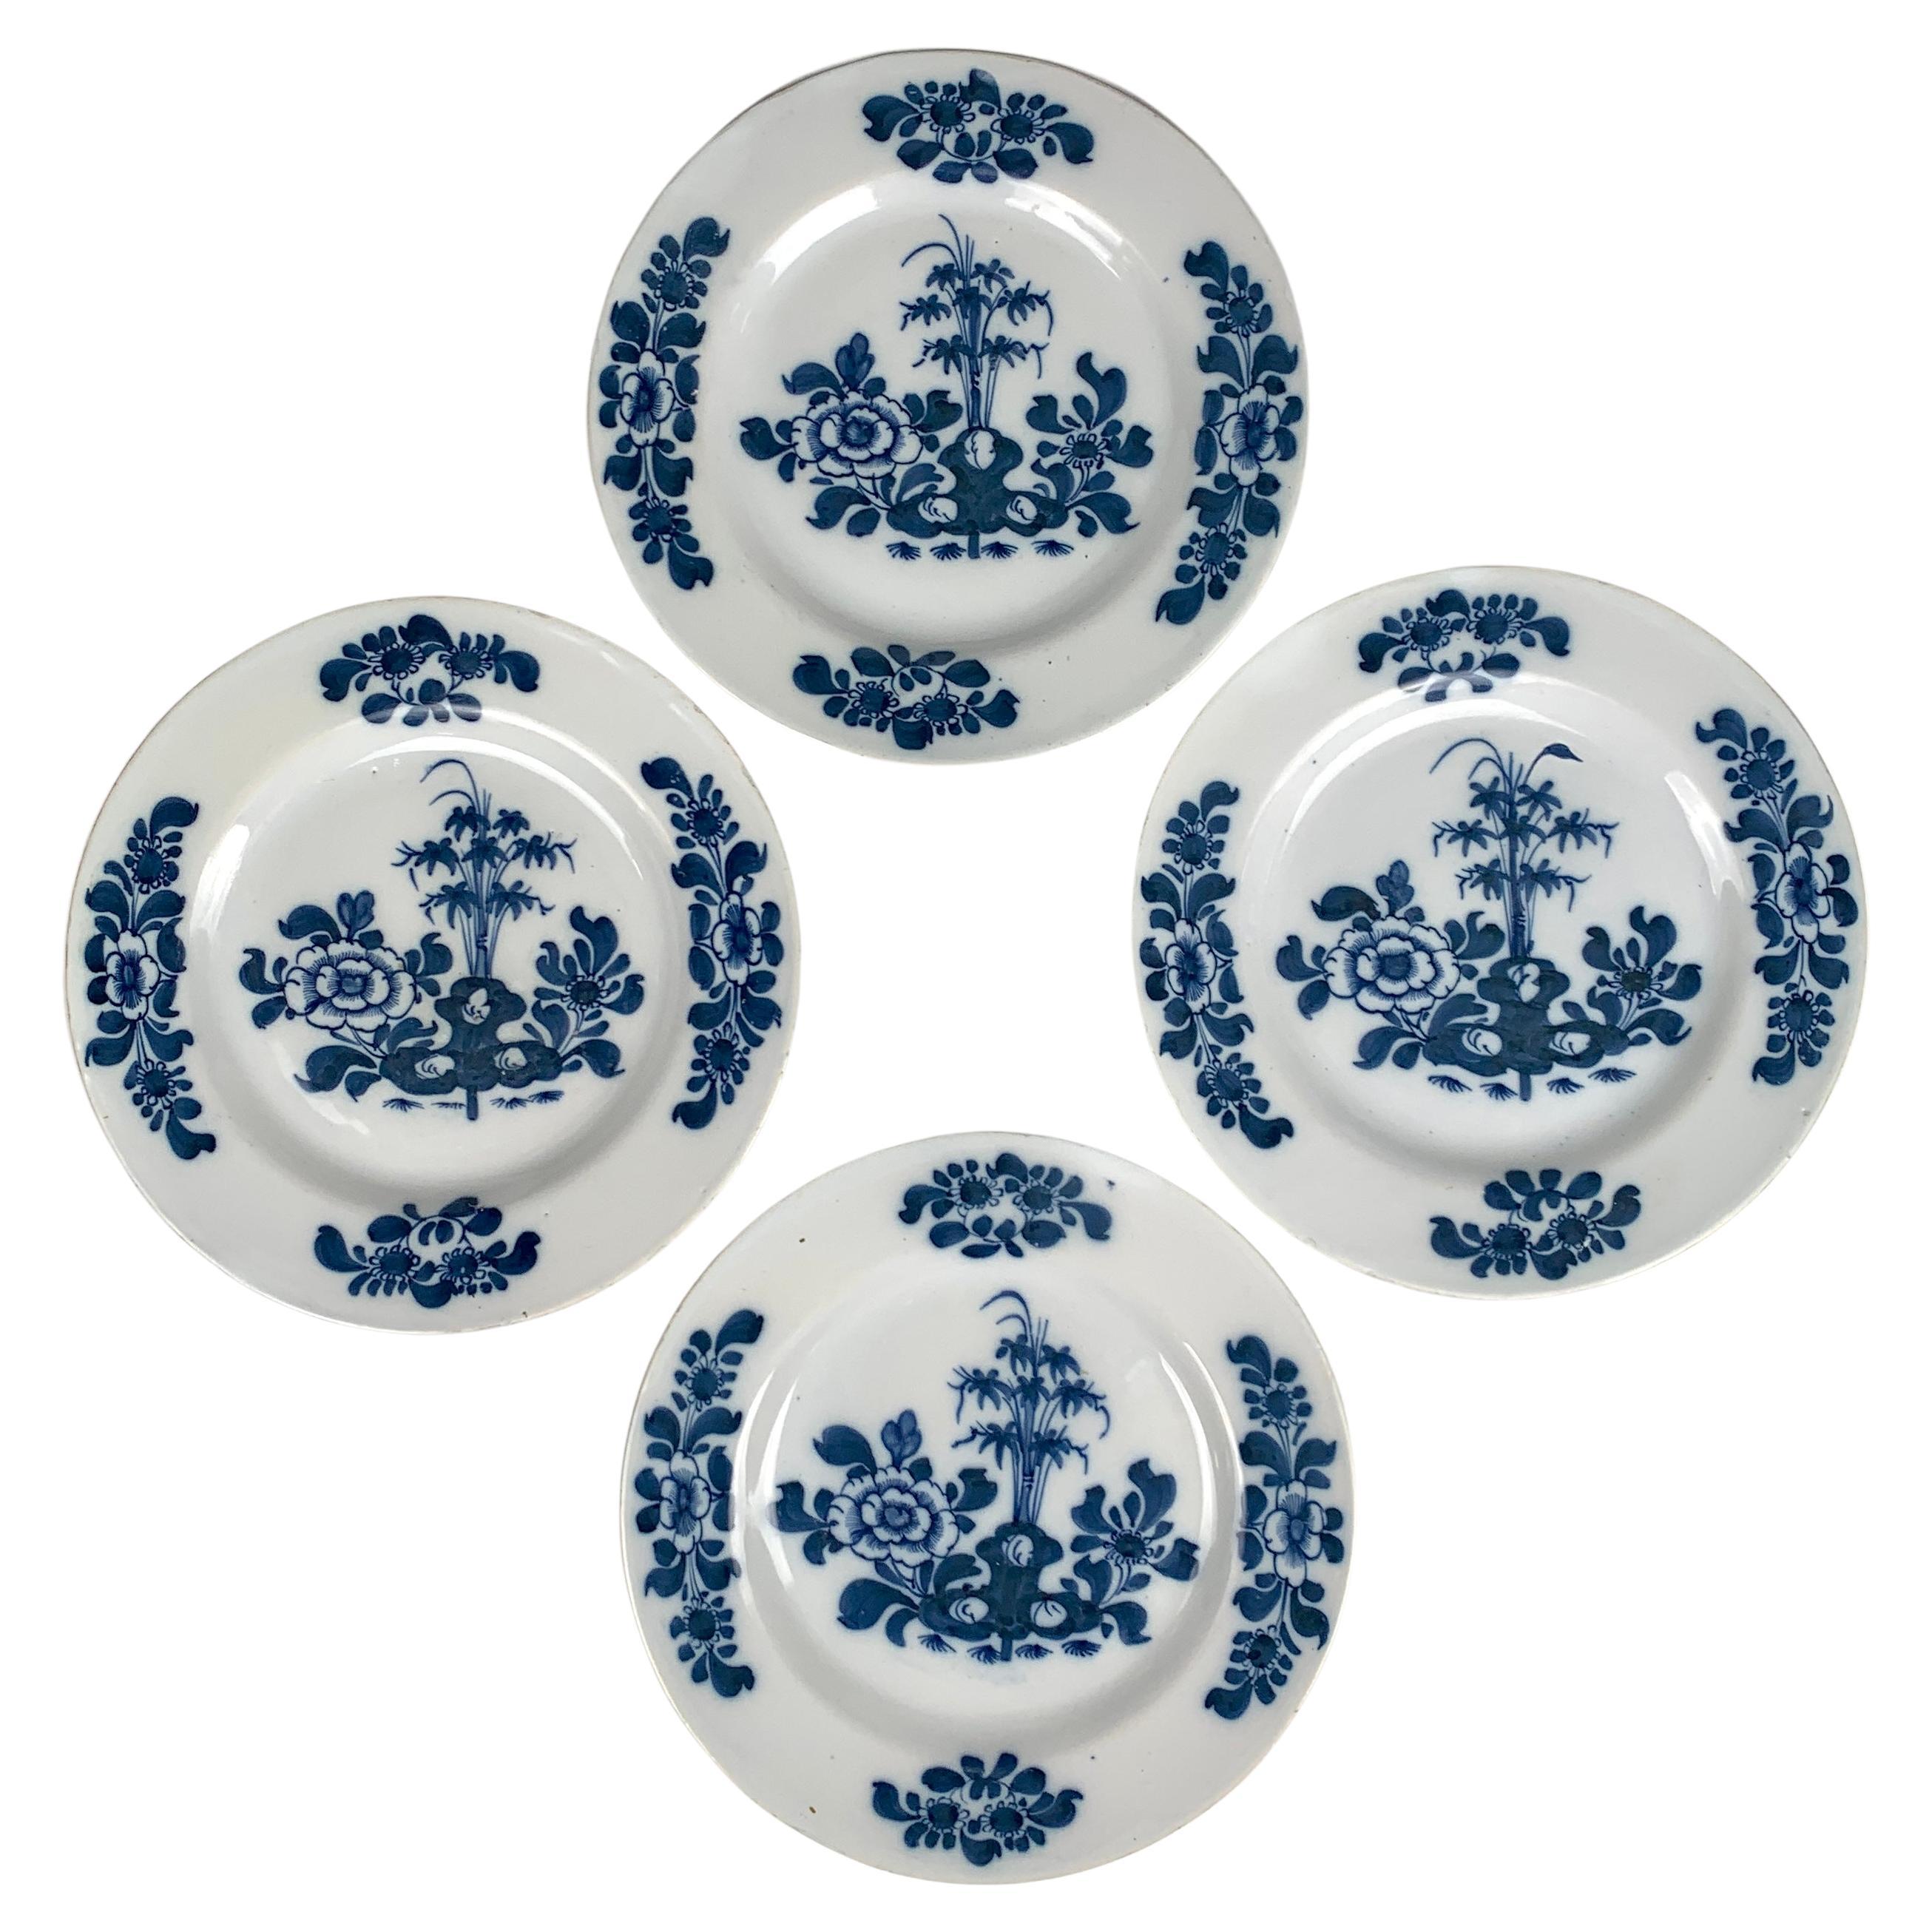 Set of 4 Blue and White Delft Plates or Dishes Hand Painted 18th Century England For Sale